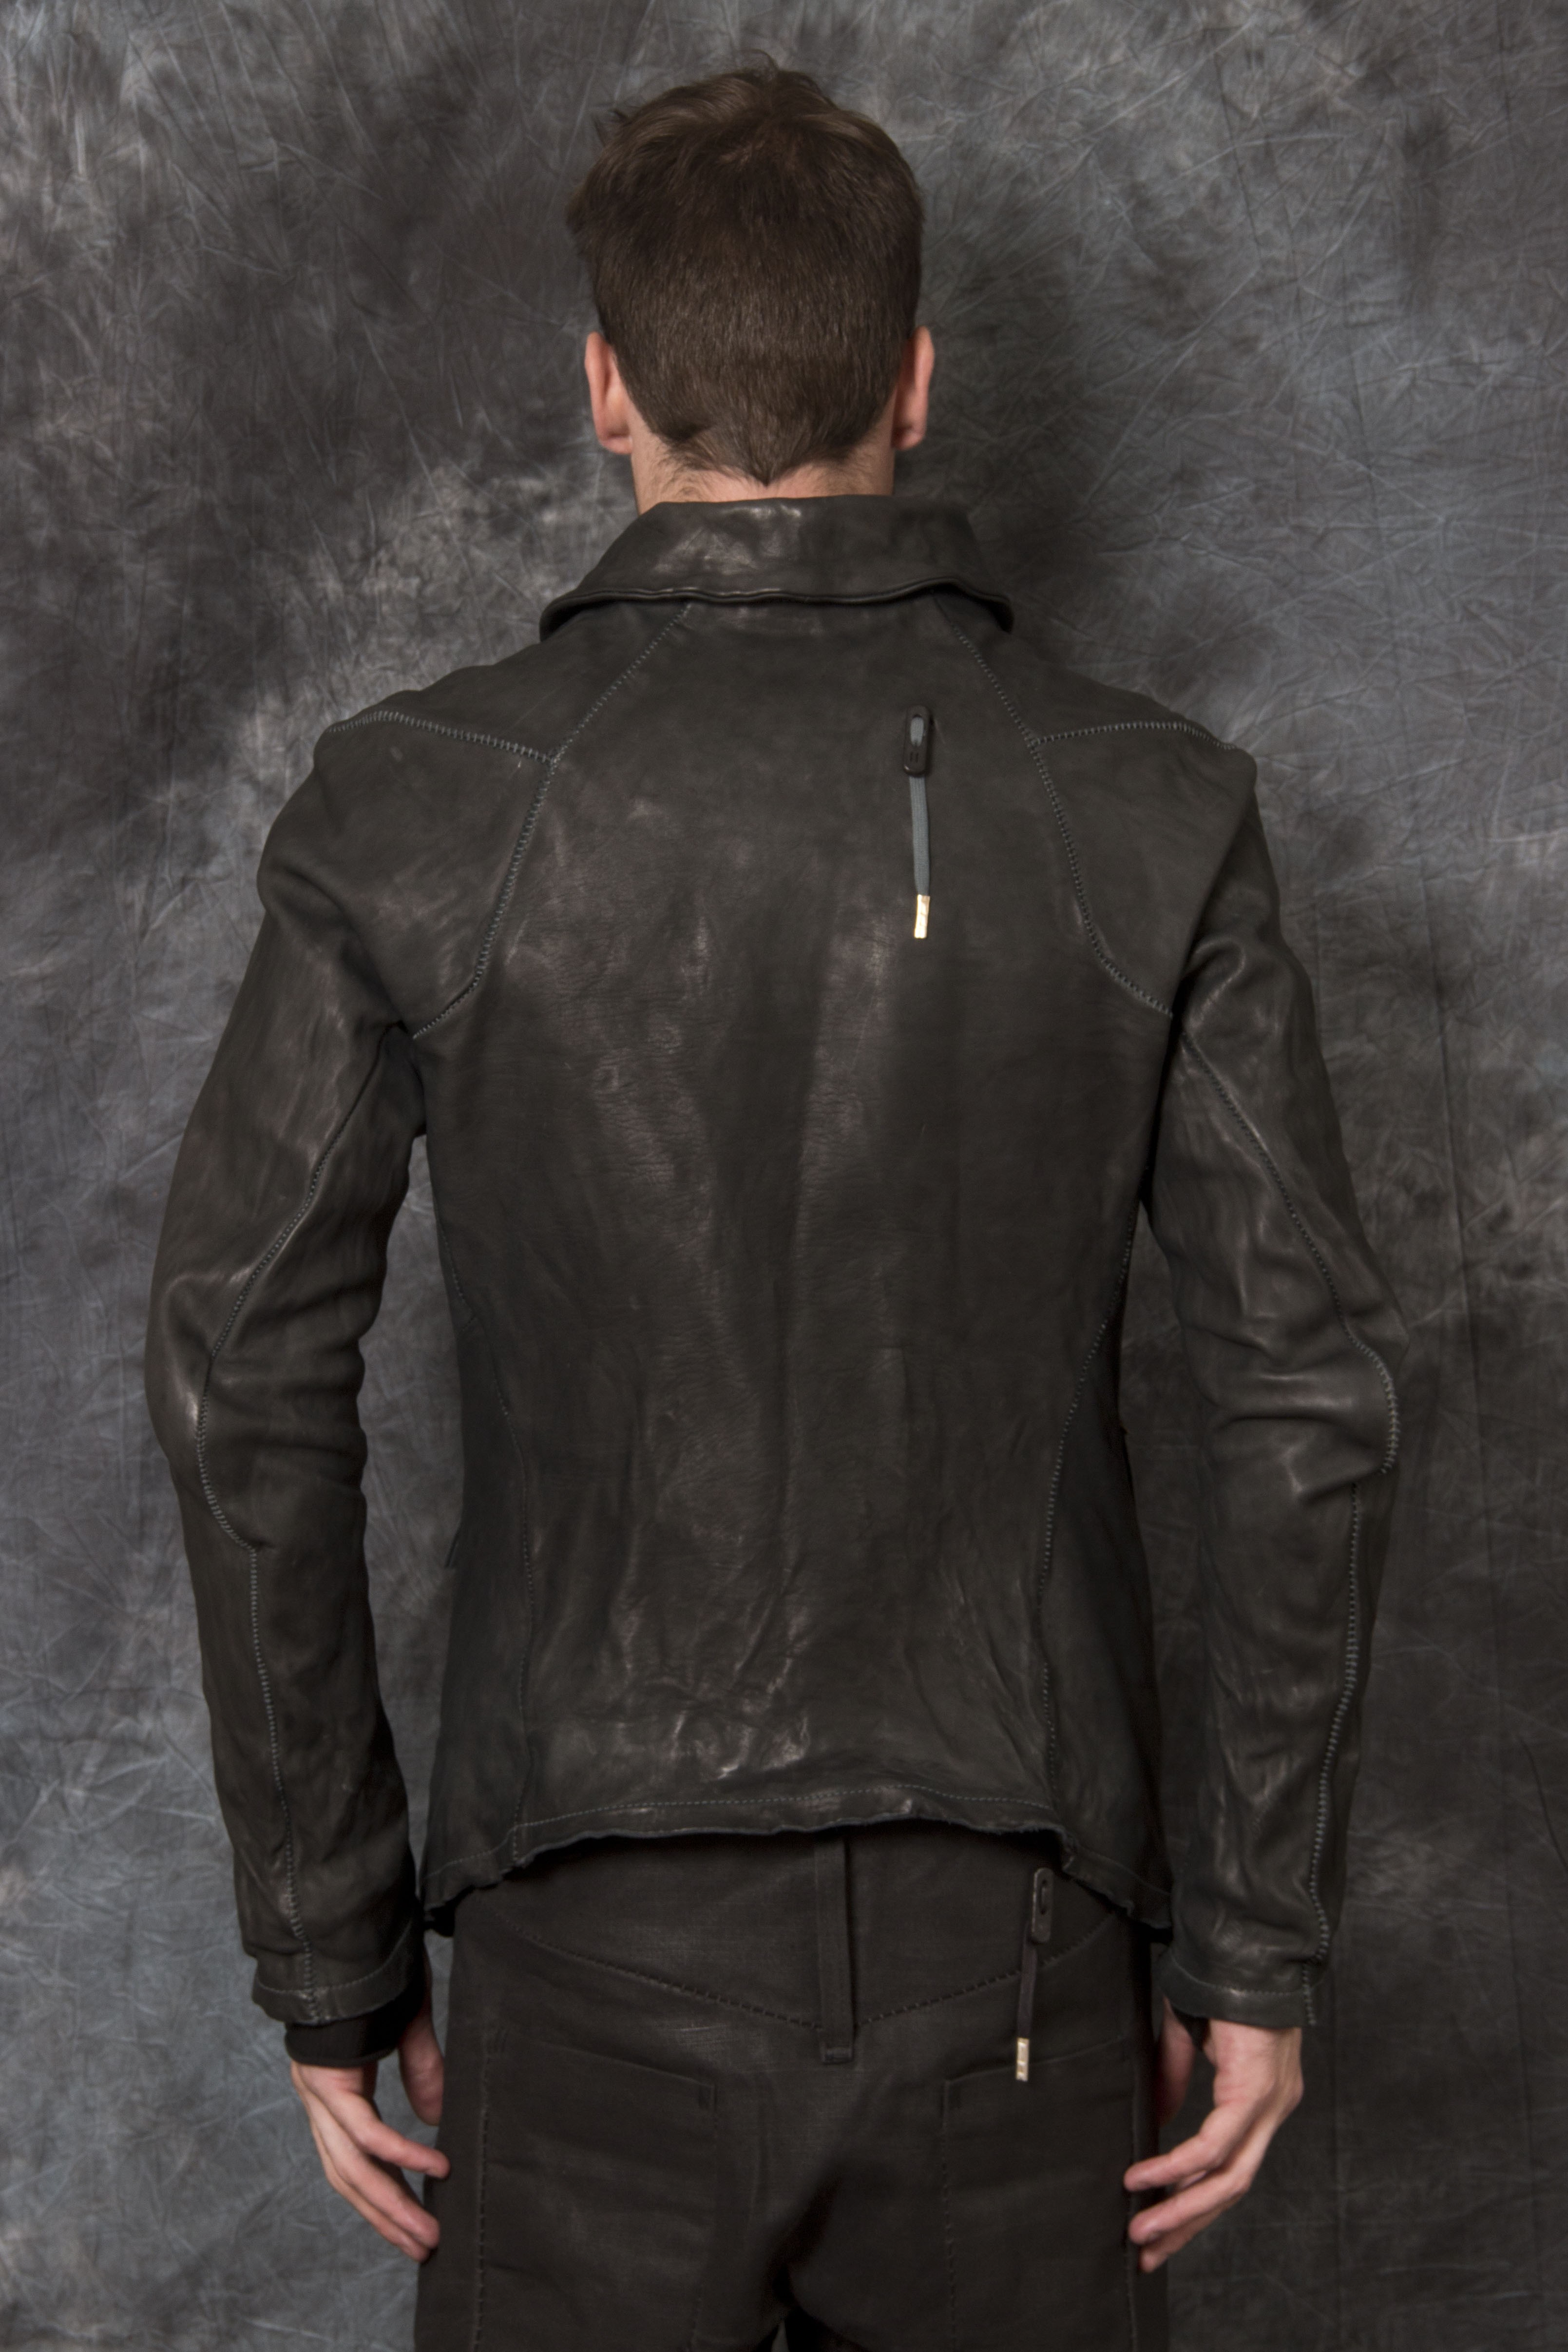 Leather Jackets: Post Pictures of the Best You've Seen/Owned? - Page 612